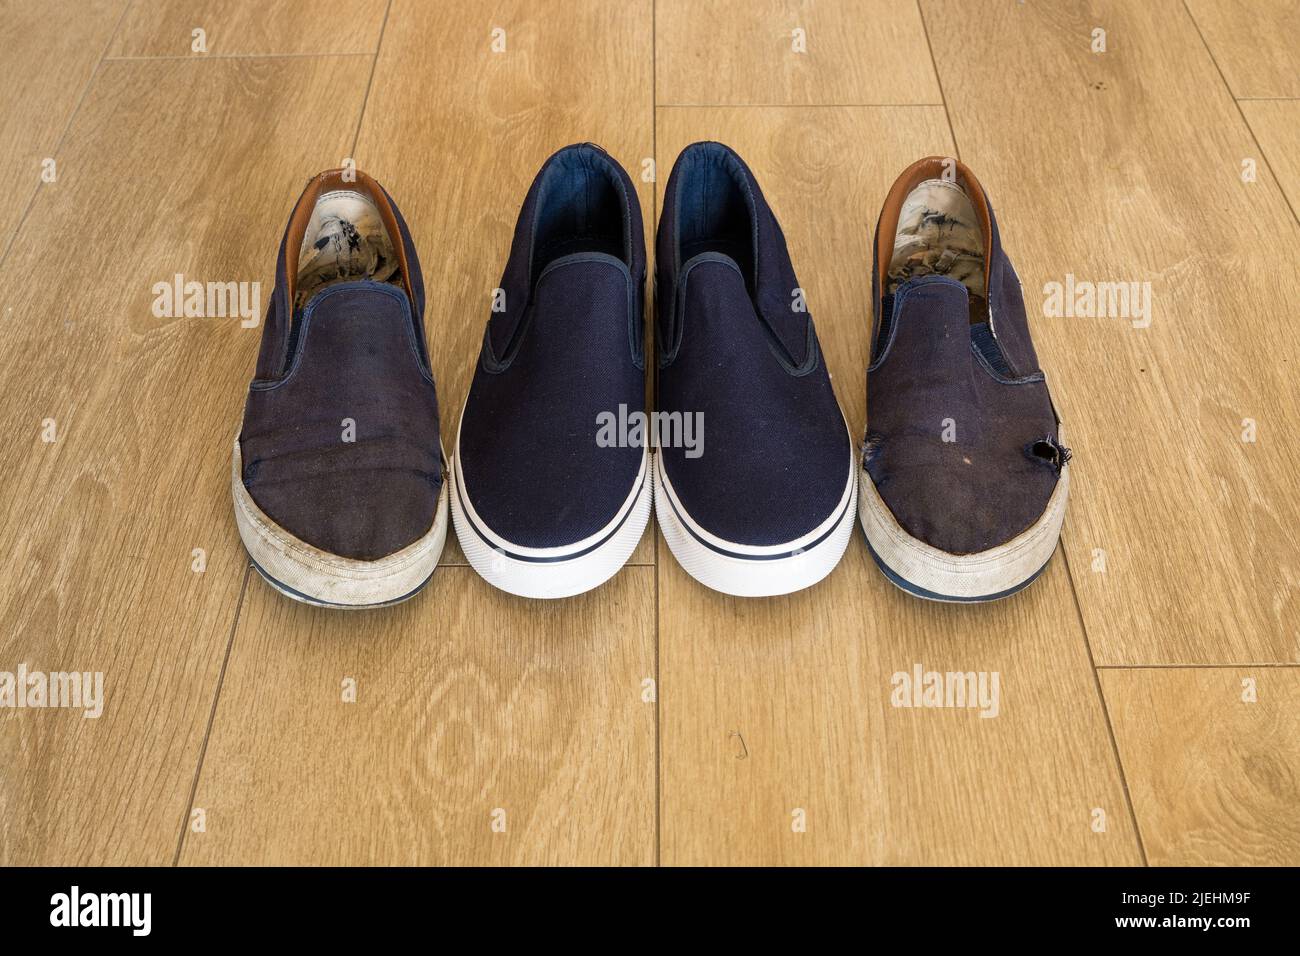 Stark comparison - blue and white shoes - new versus old and worn - inequality Stock Photo